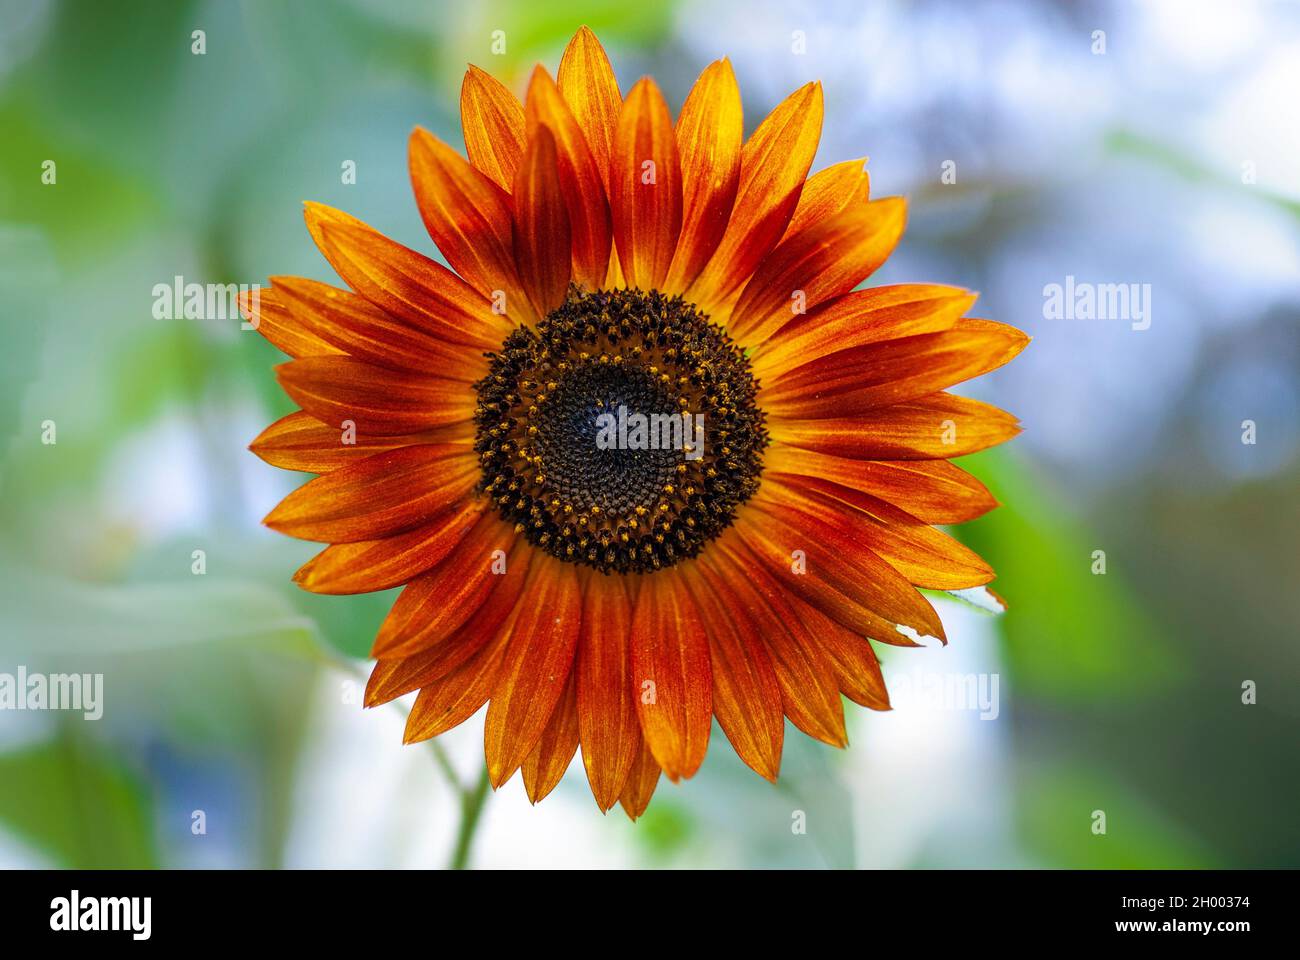 Picture of a colorful sunflower with yellow, orange, and red colors taken in the garden during the summertime. Stock Photo